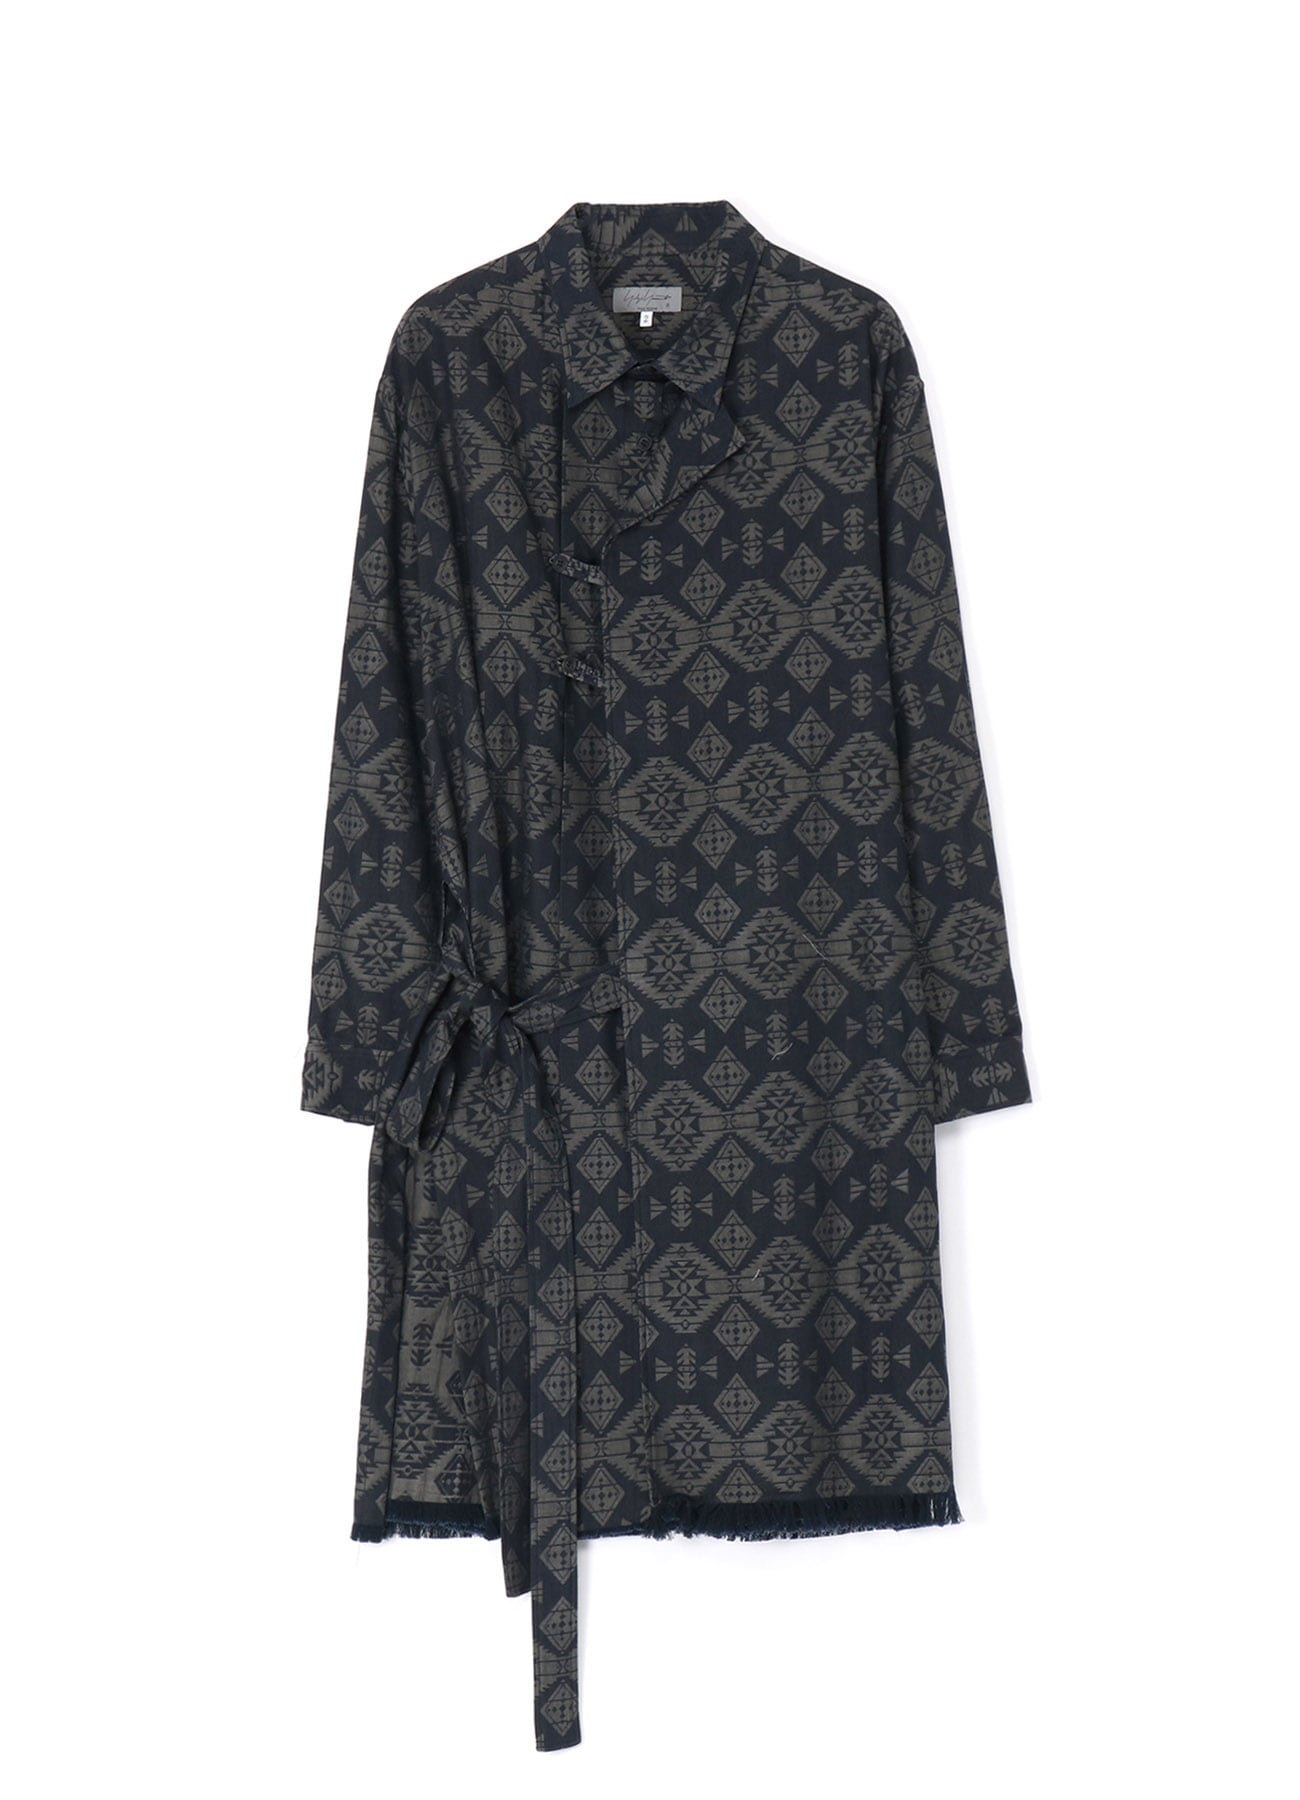 GEOMETRIC PATTERNED SHIRT WITH GOWN-STYLE CLOSURE